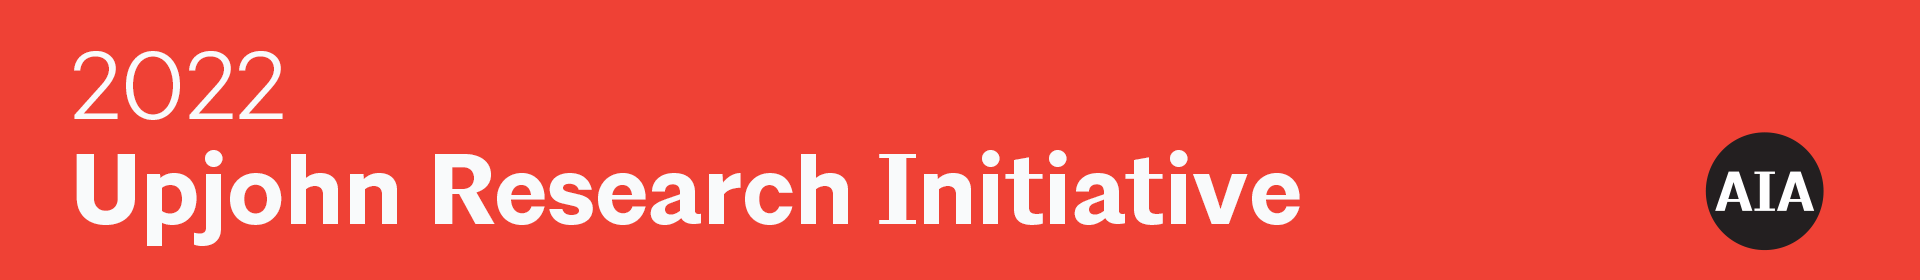 AIA Upjohn Research Initiative Grants Event Banner